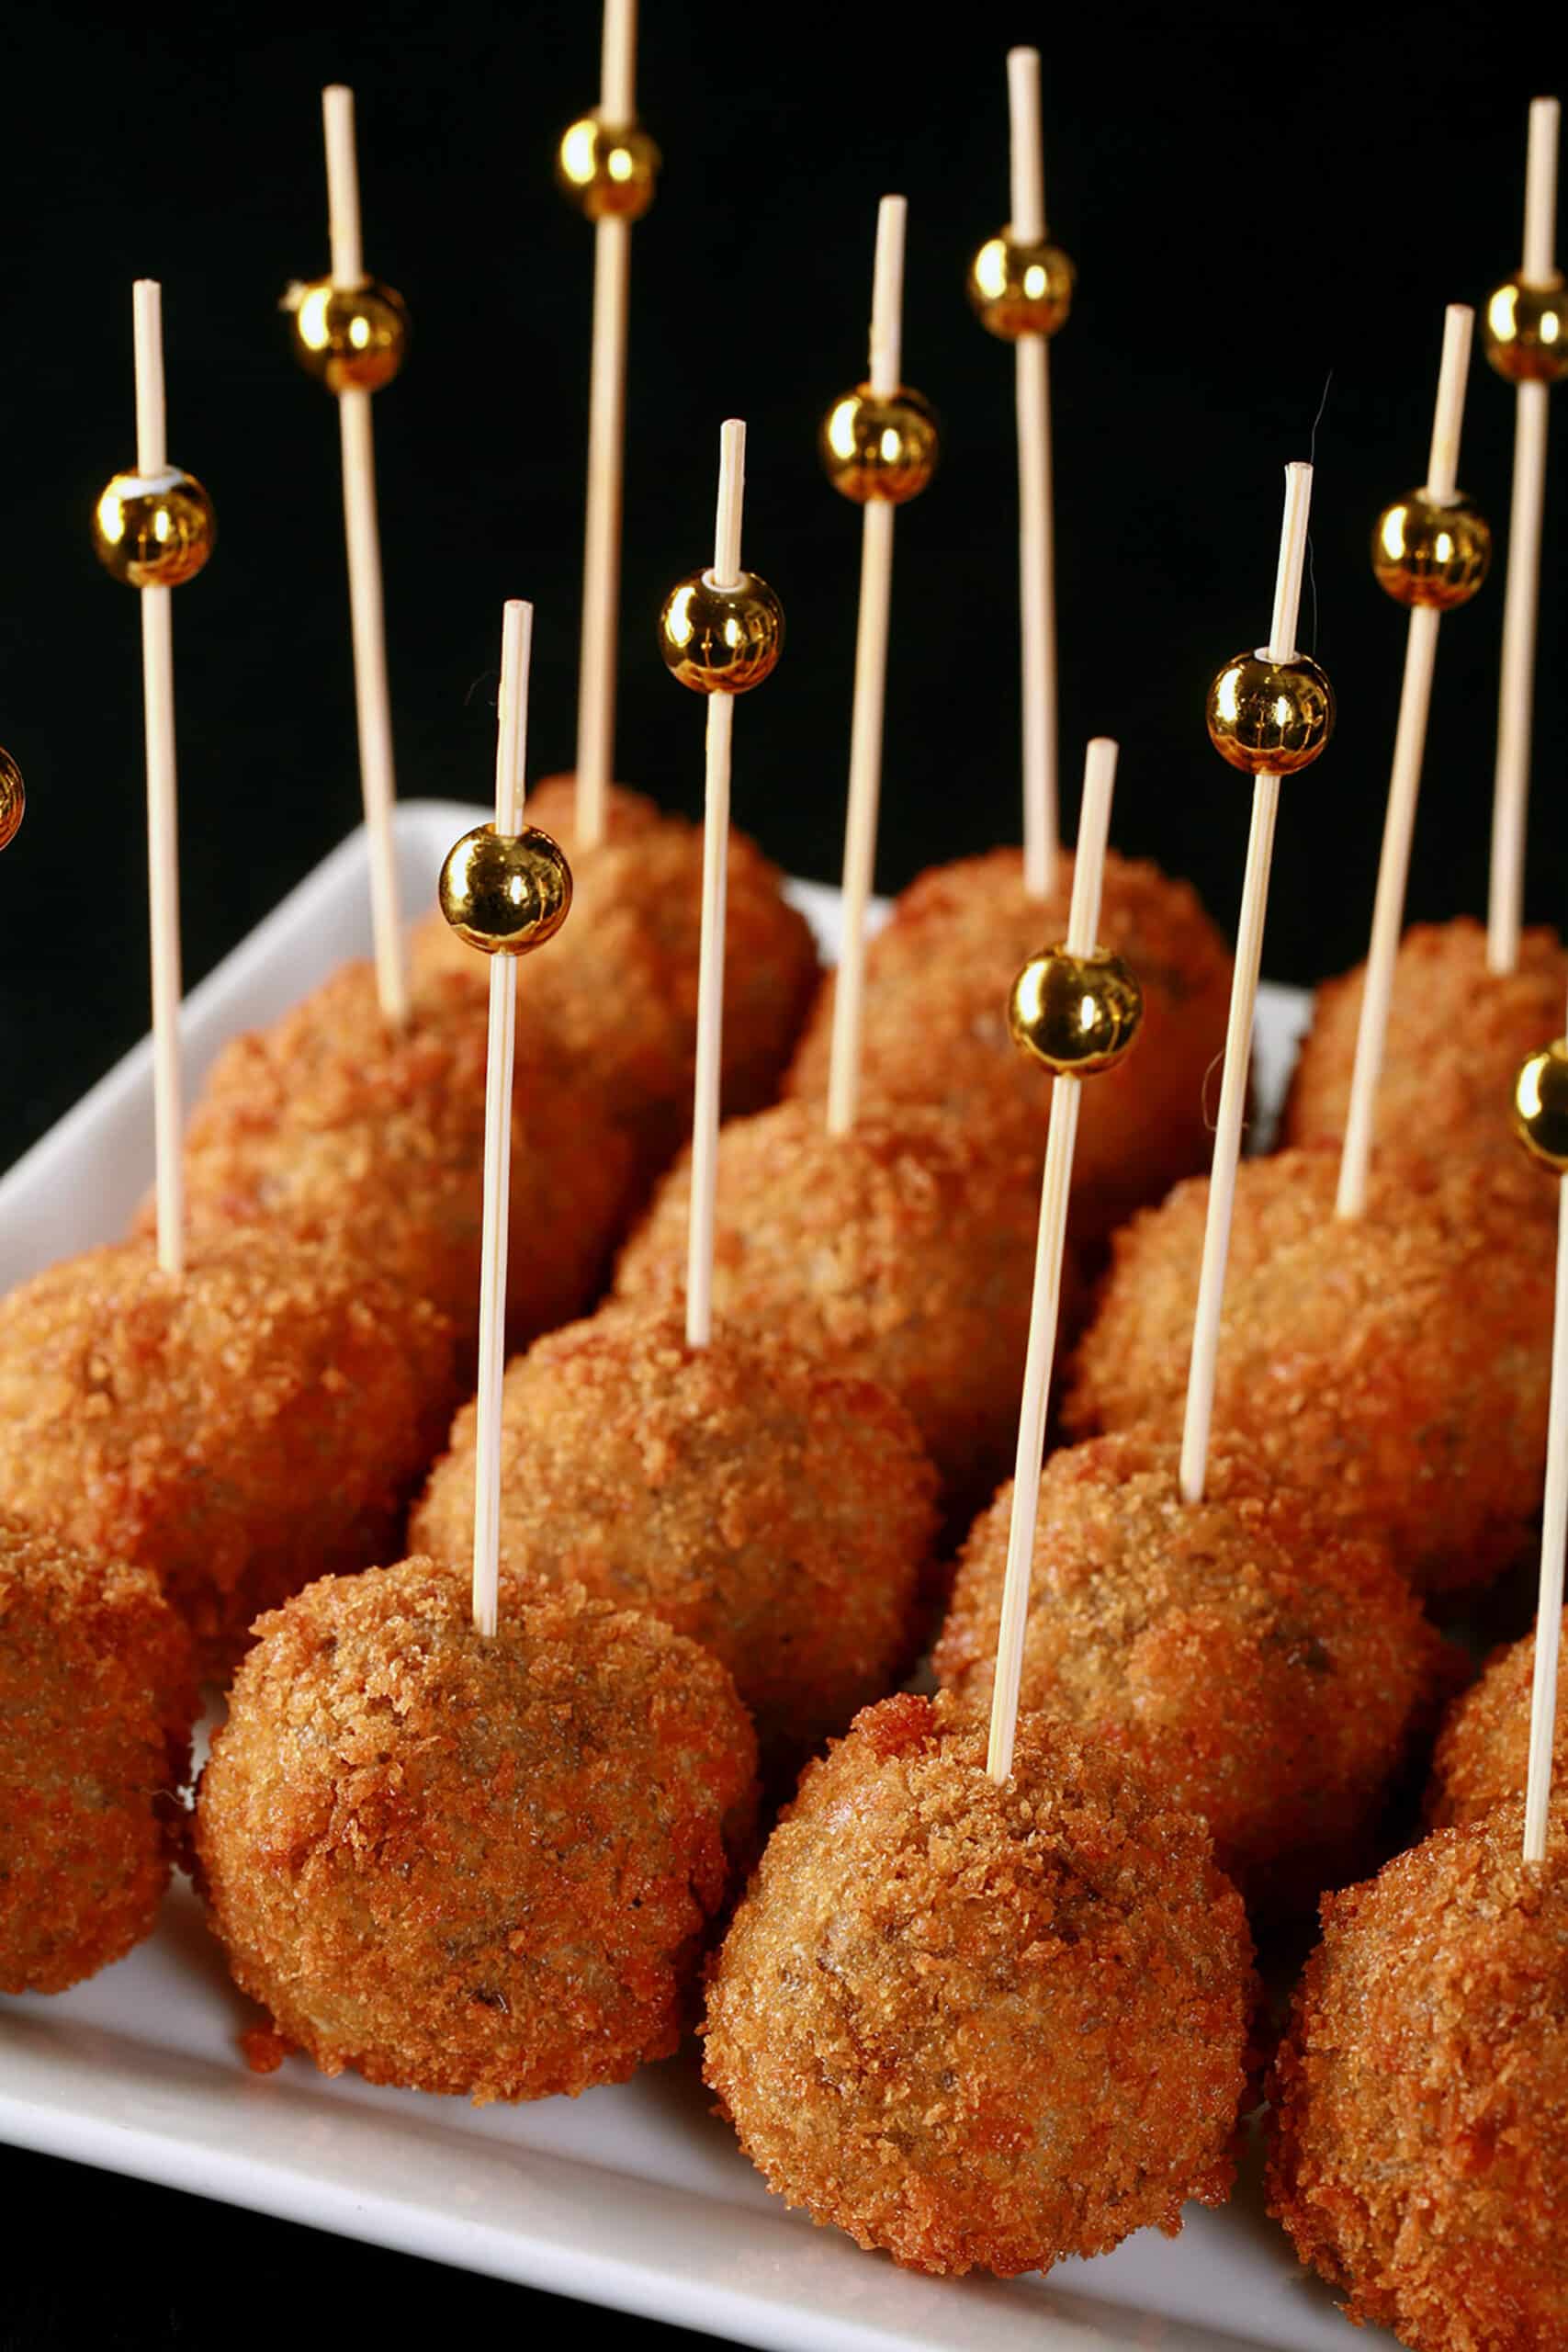 16 mini mushroom arancini on a plate, each with a tall toothpick topped with a gold ball.